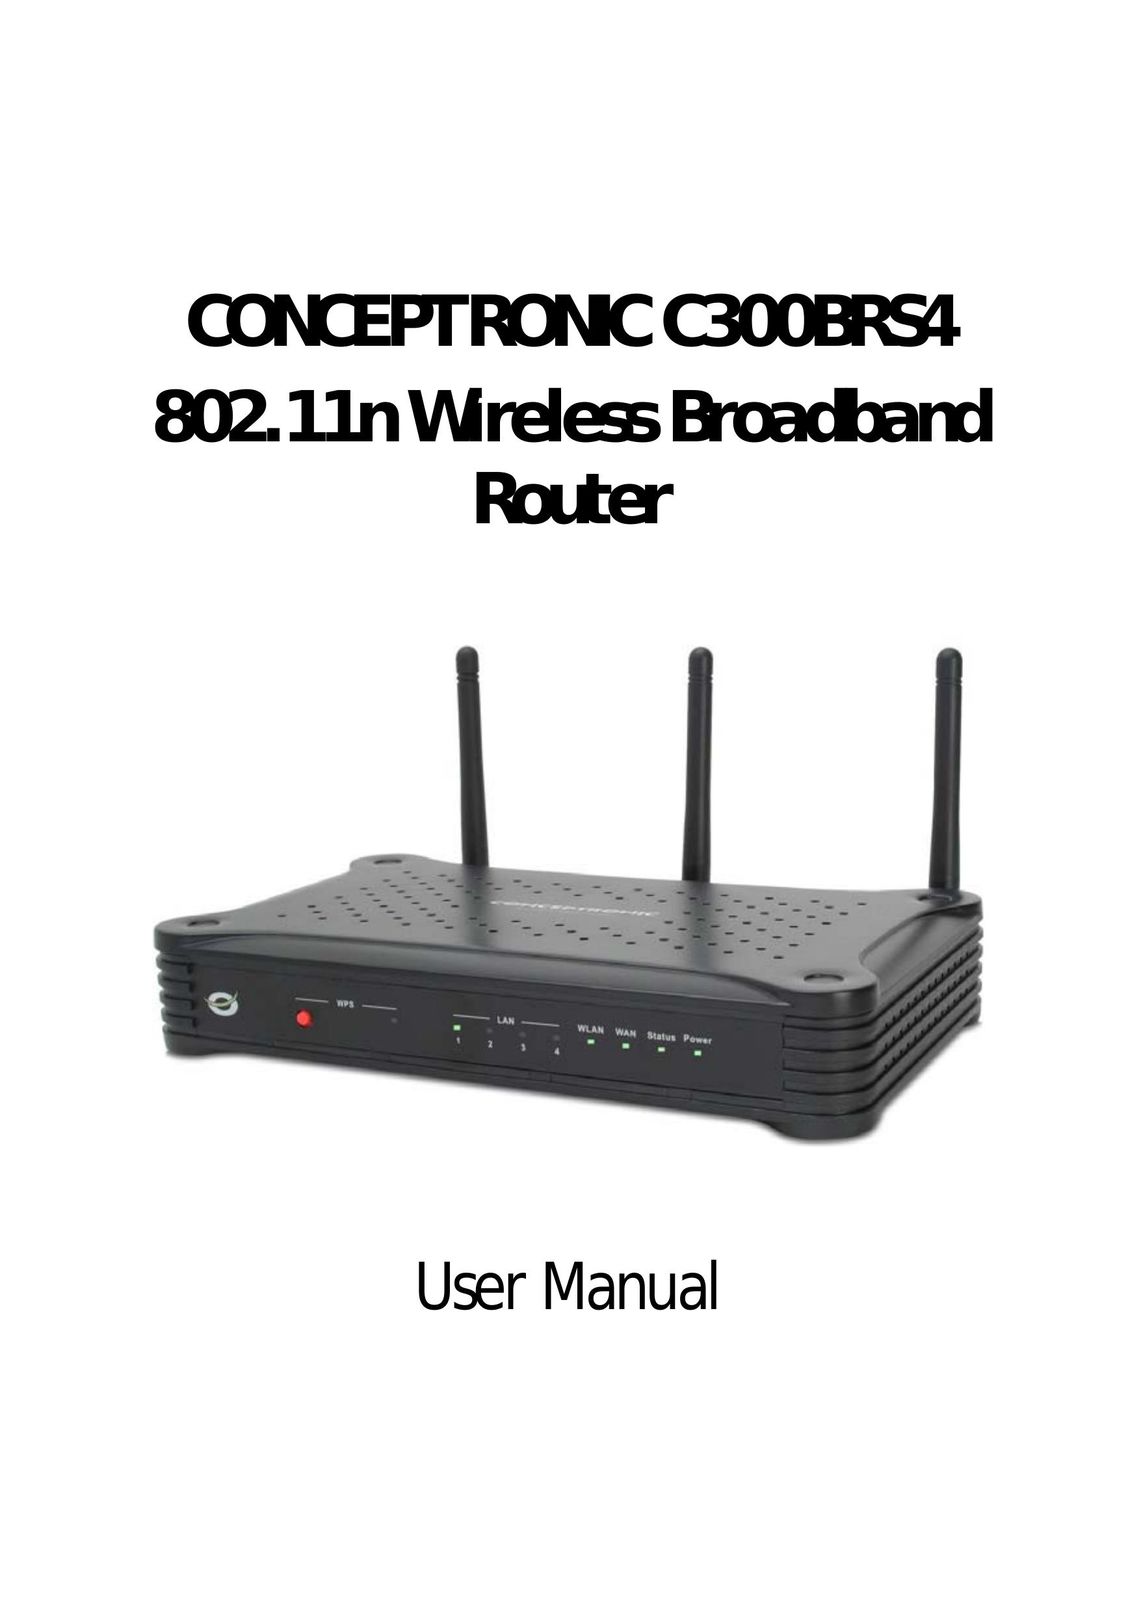 Conceptronic C300BRS4 Network Router User Manual